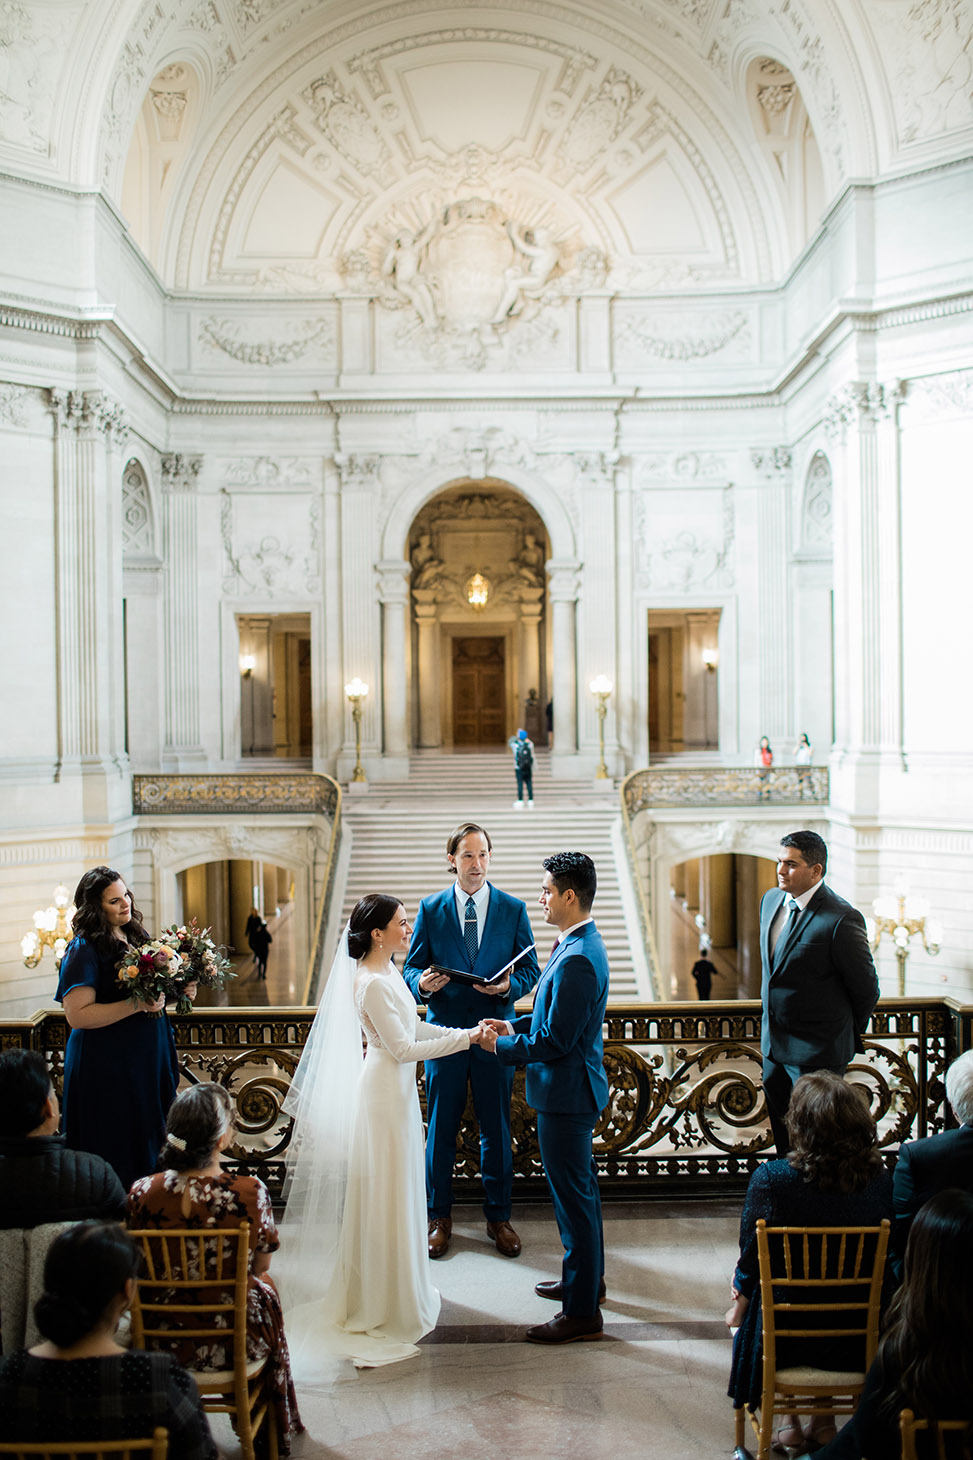 A wedding couple have their ceremony in the middle of City Hall.